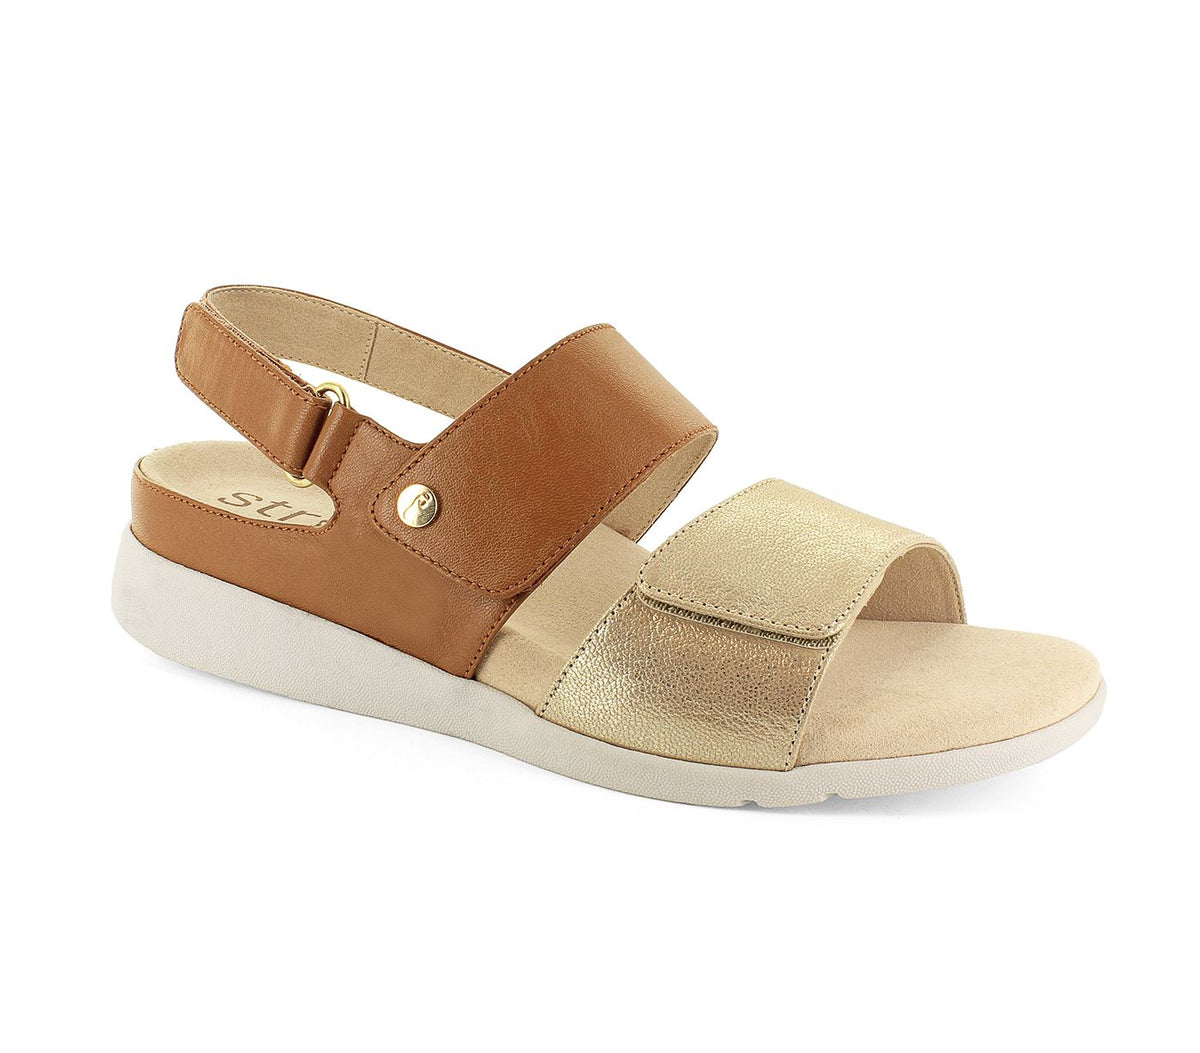 Strive - Riviera || Tan and Gold Velcro Leather Sandal